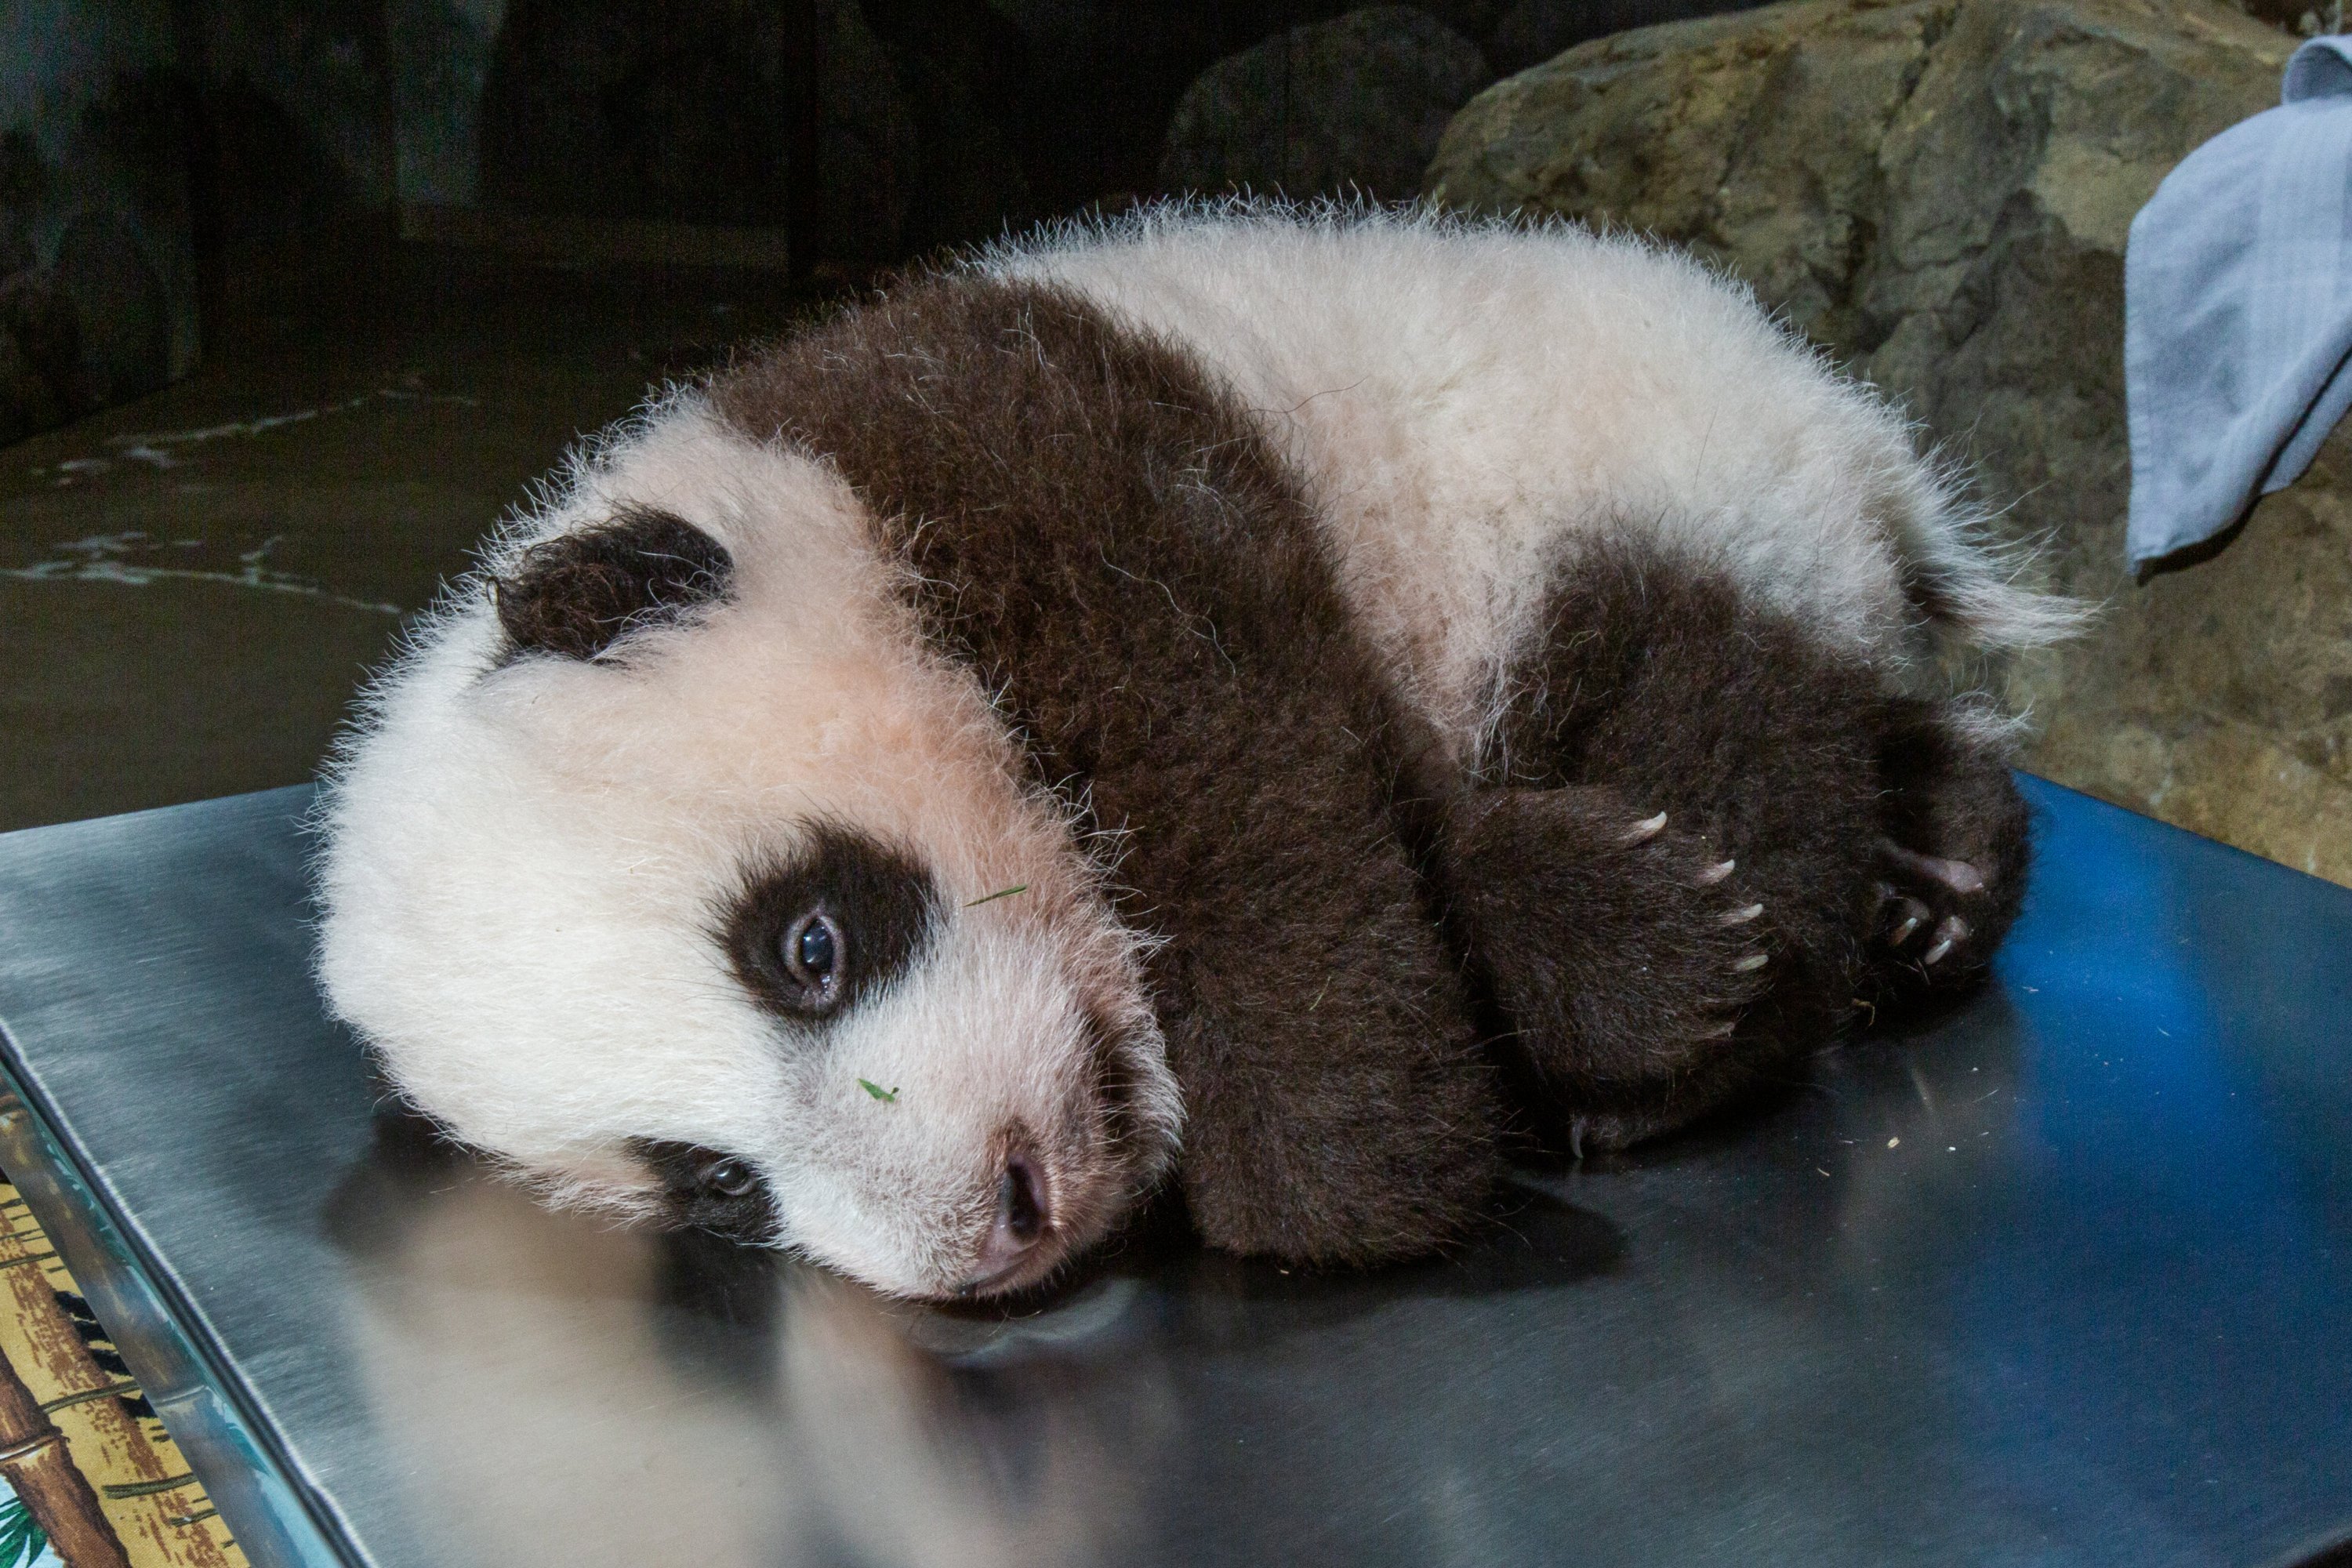 While We Ve All Been Freaking Out Here S What The Baby Panda Has Been Doing This Week